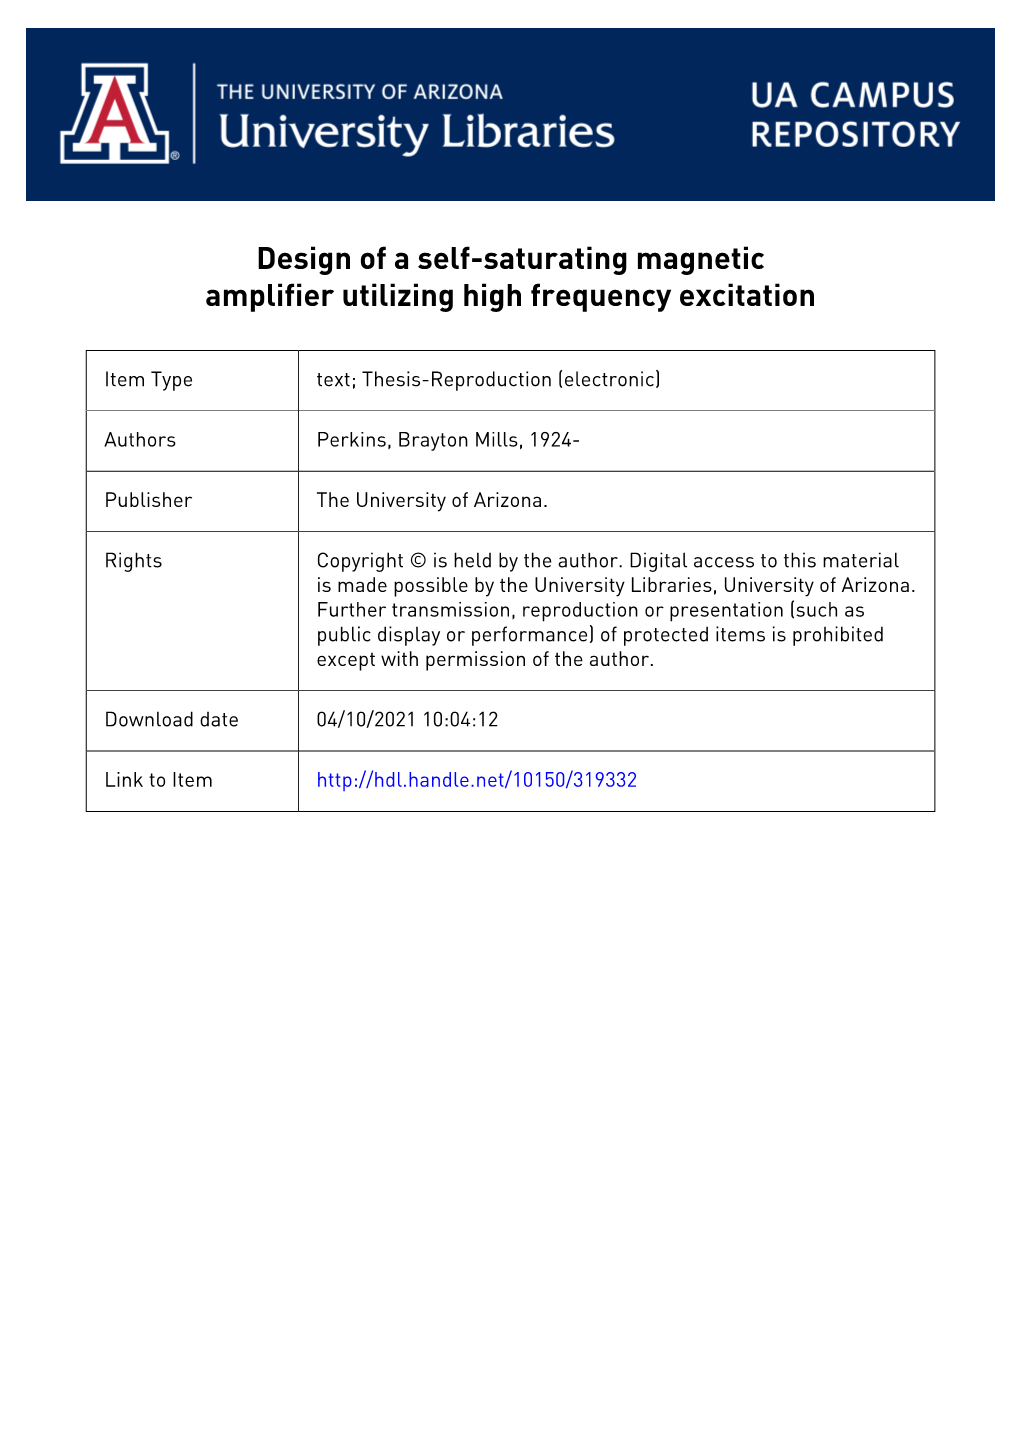 Design of a Self-Saturating Magnetic Amplifier Utilizing High Frequency Excitation